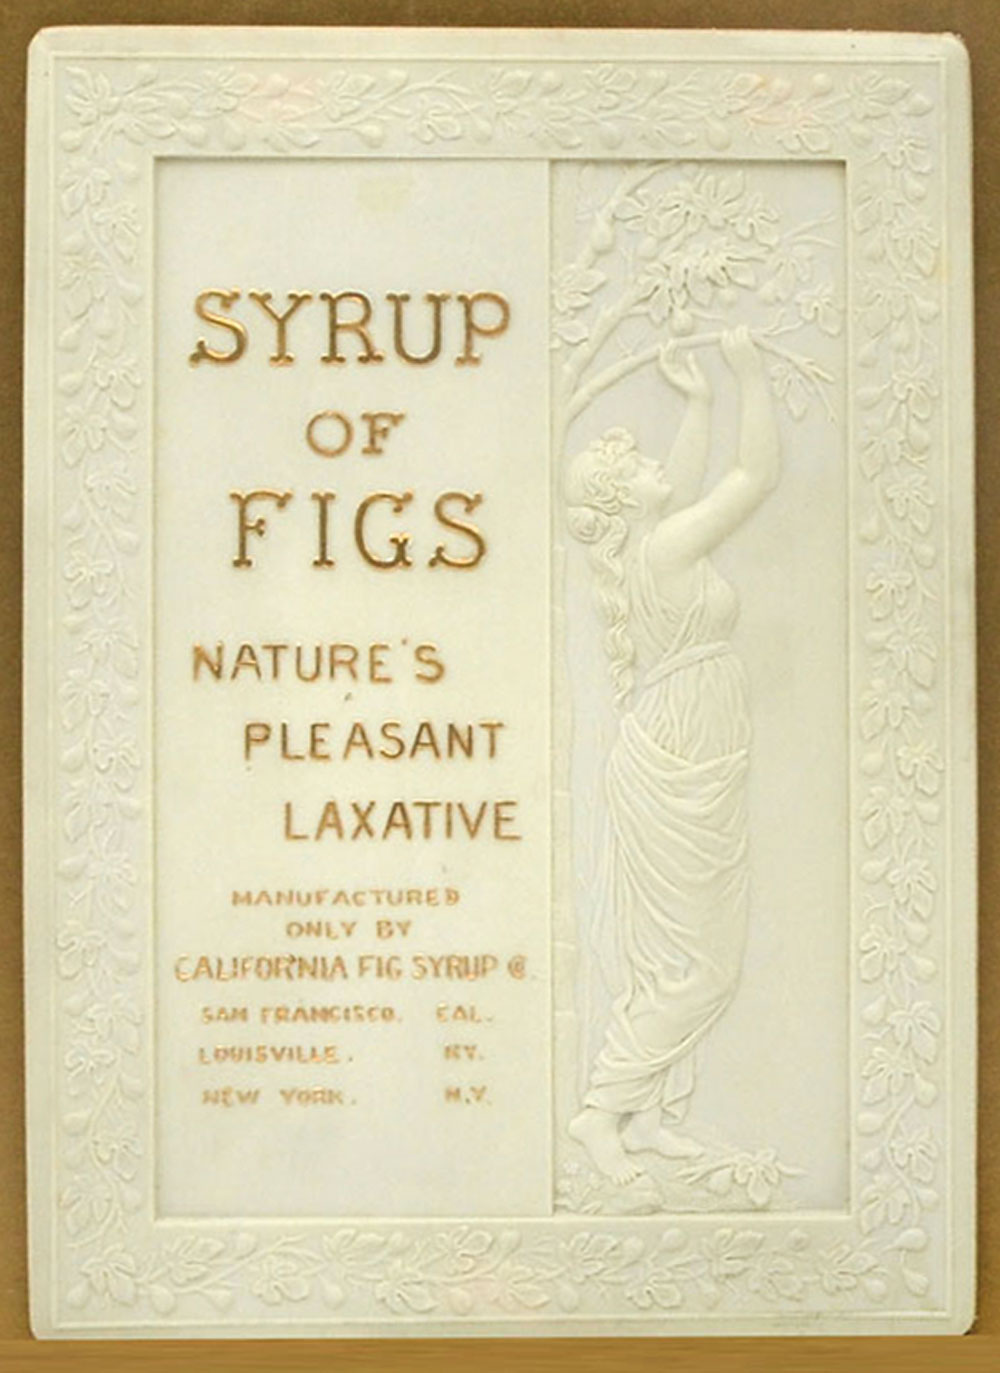 SYRUP OF FIGS ADVERTISEMENT BY